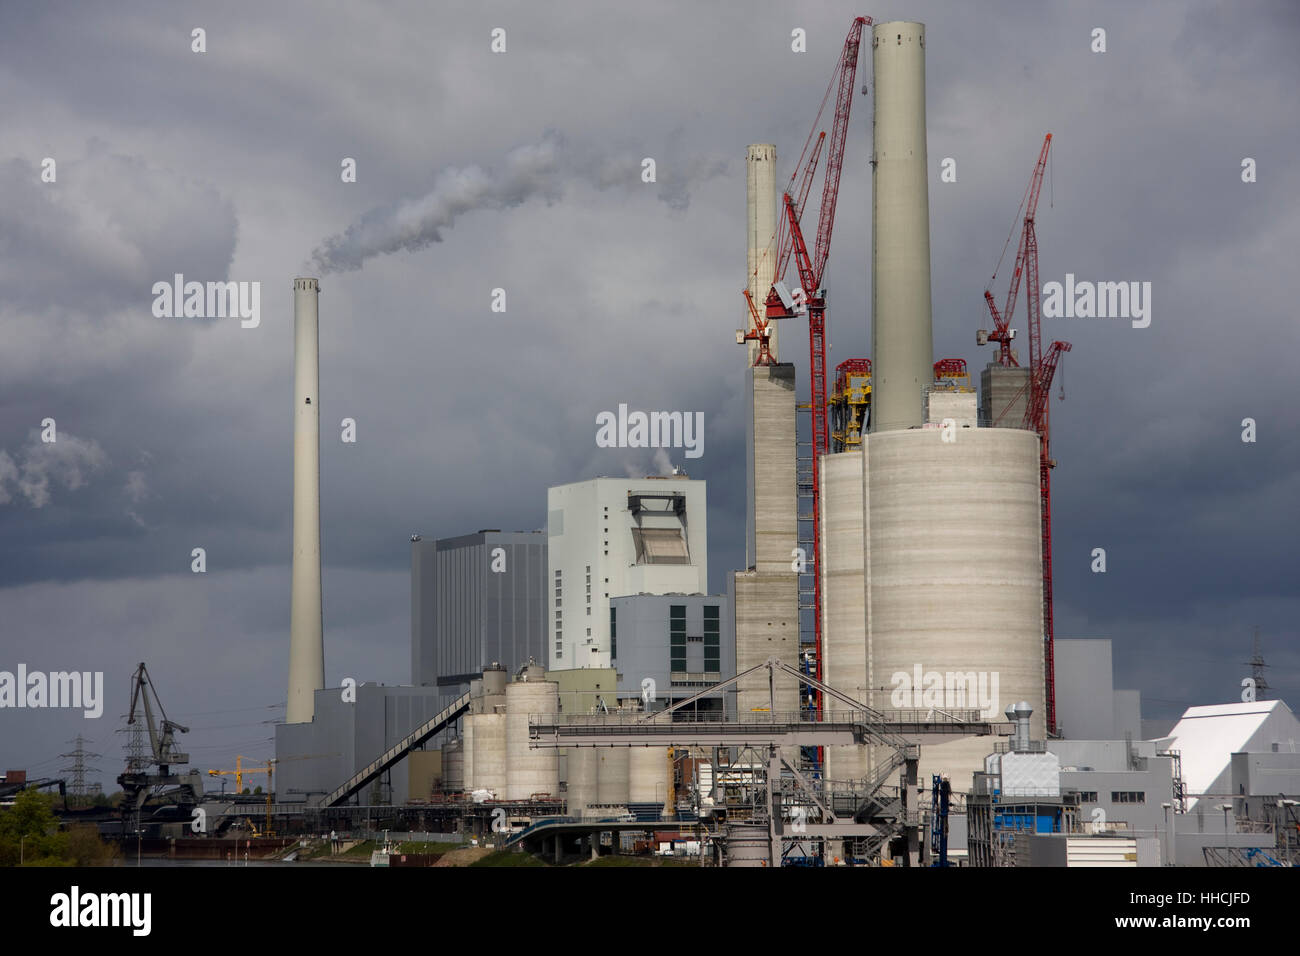 industry, coal power station, cooling tower, industrial plant, power stations, Stock Photo